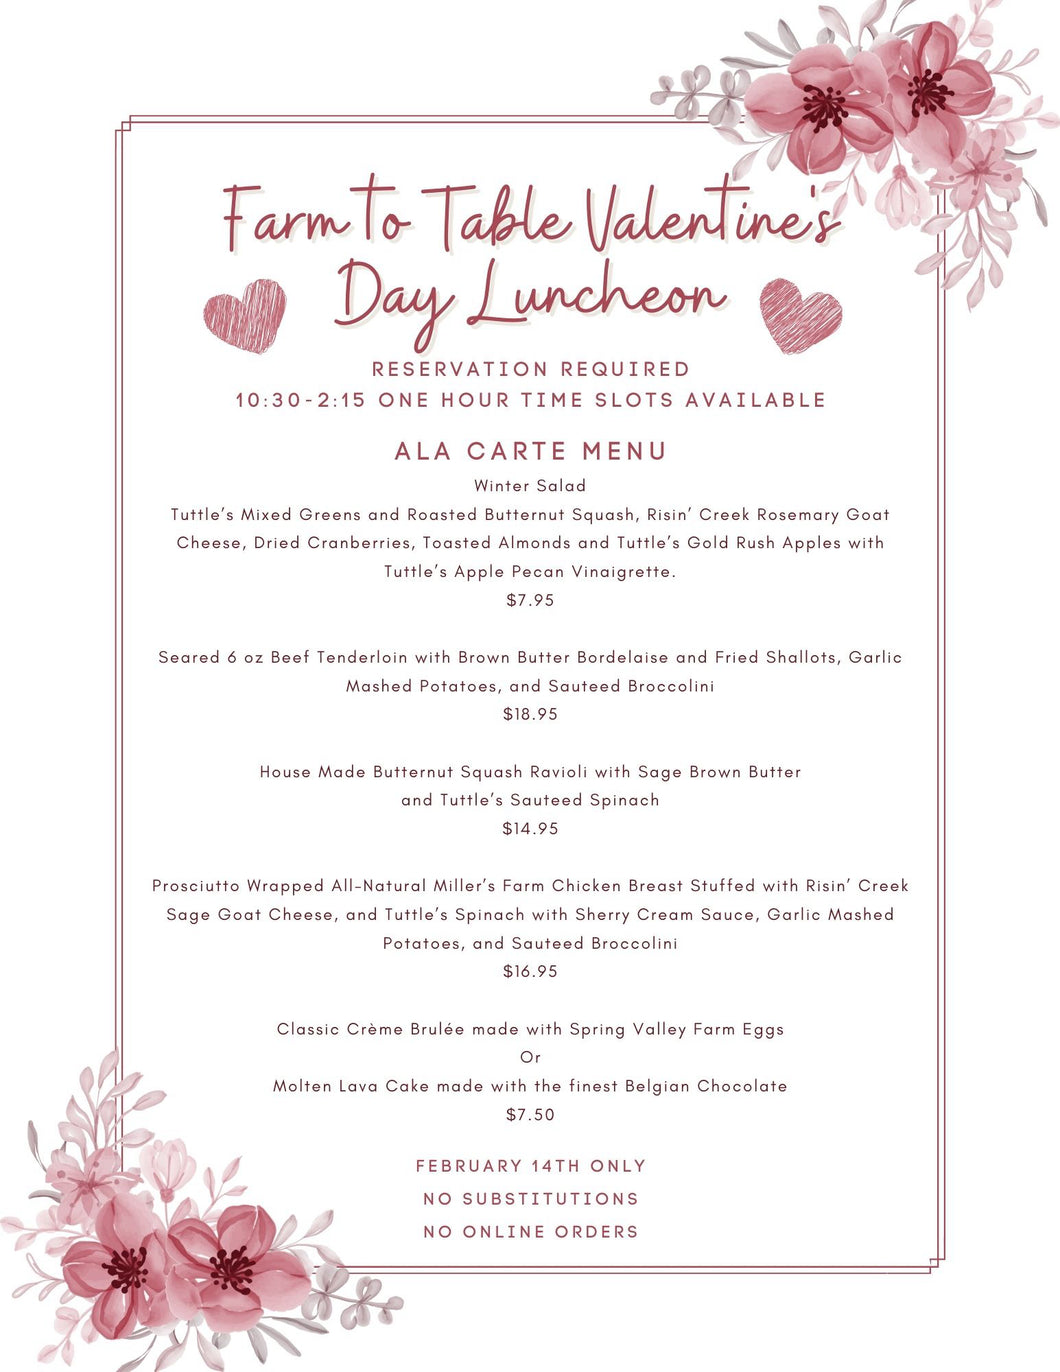 Farm to Table Valentine's Day Lunch